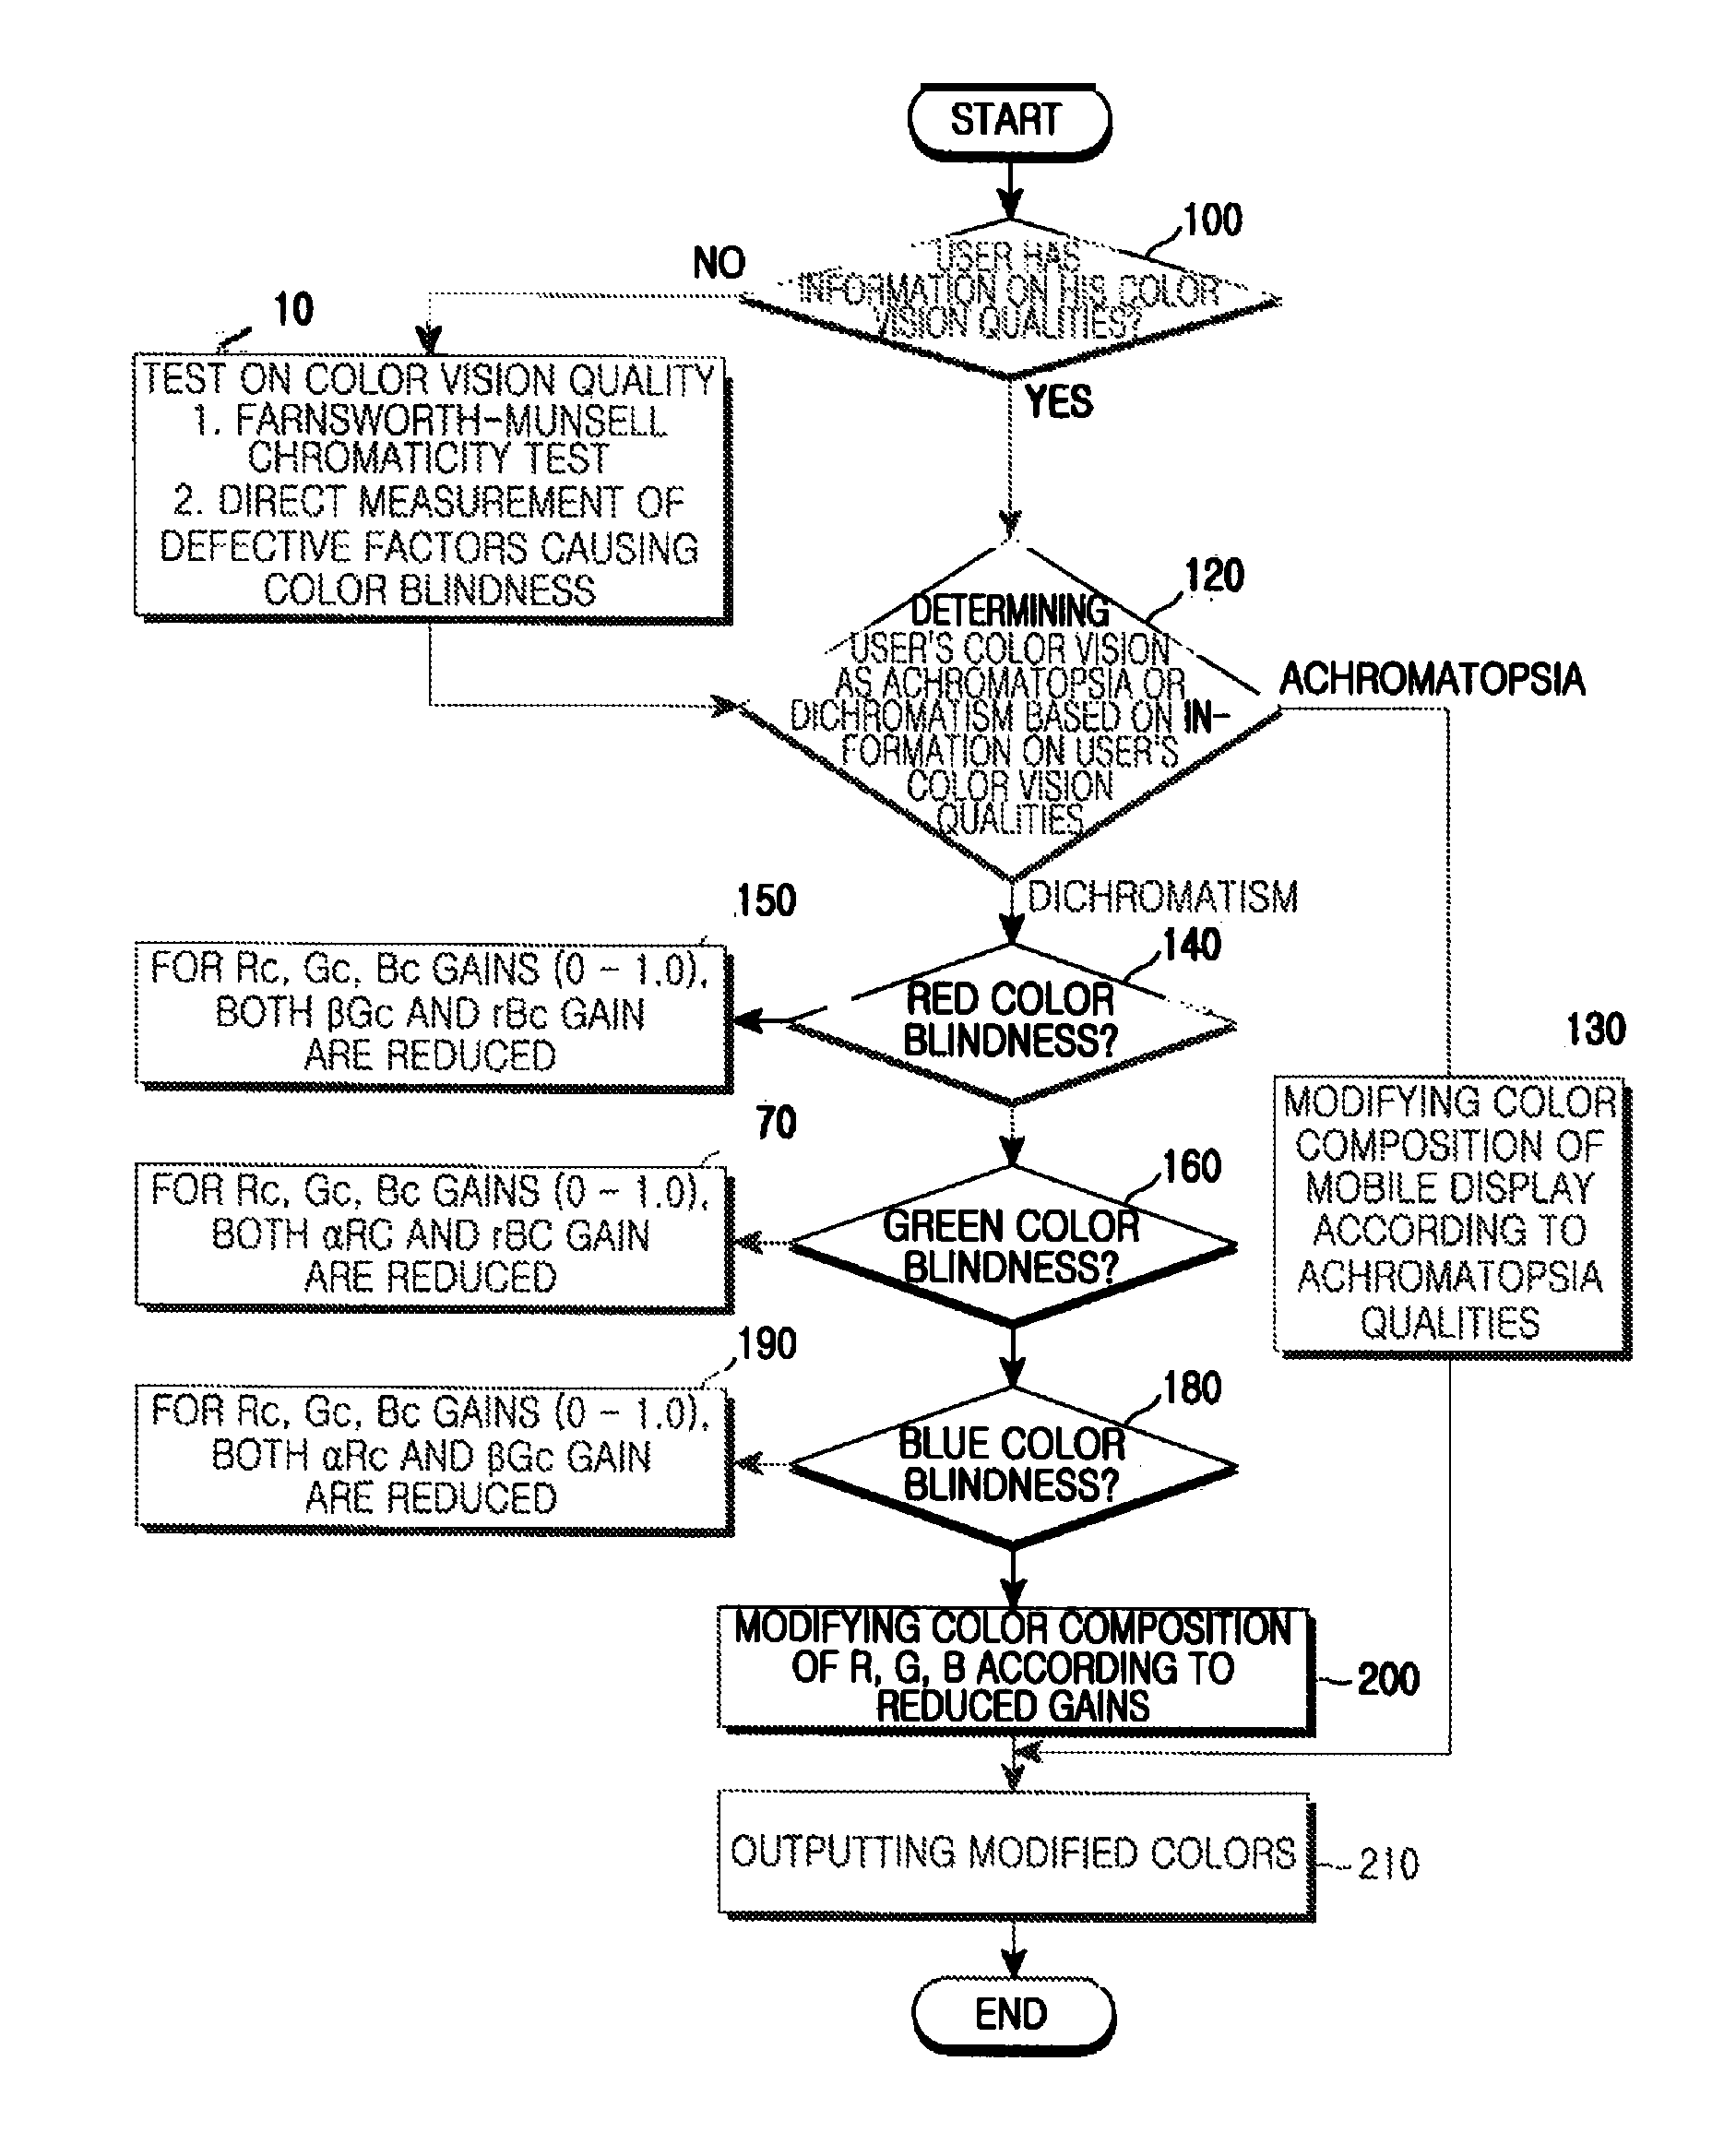 Method of modifying color composition for a color-blind person in a mobile displaying apparatus